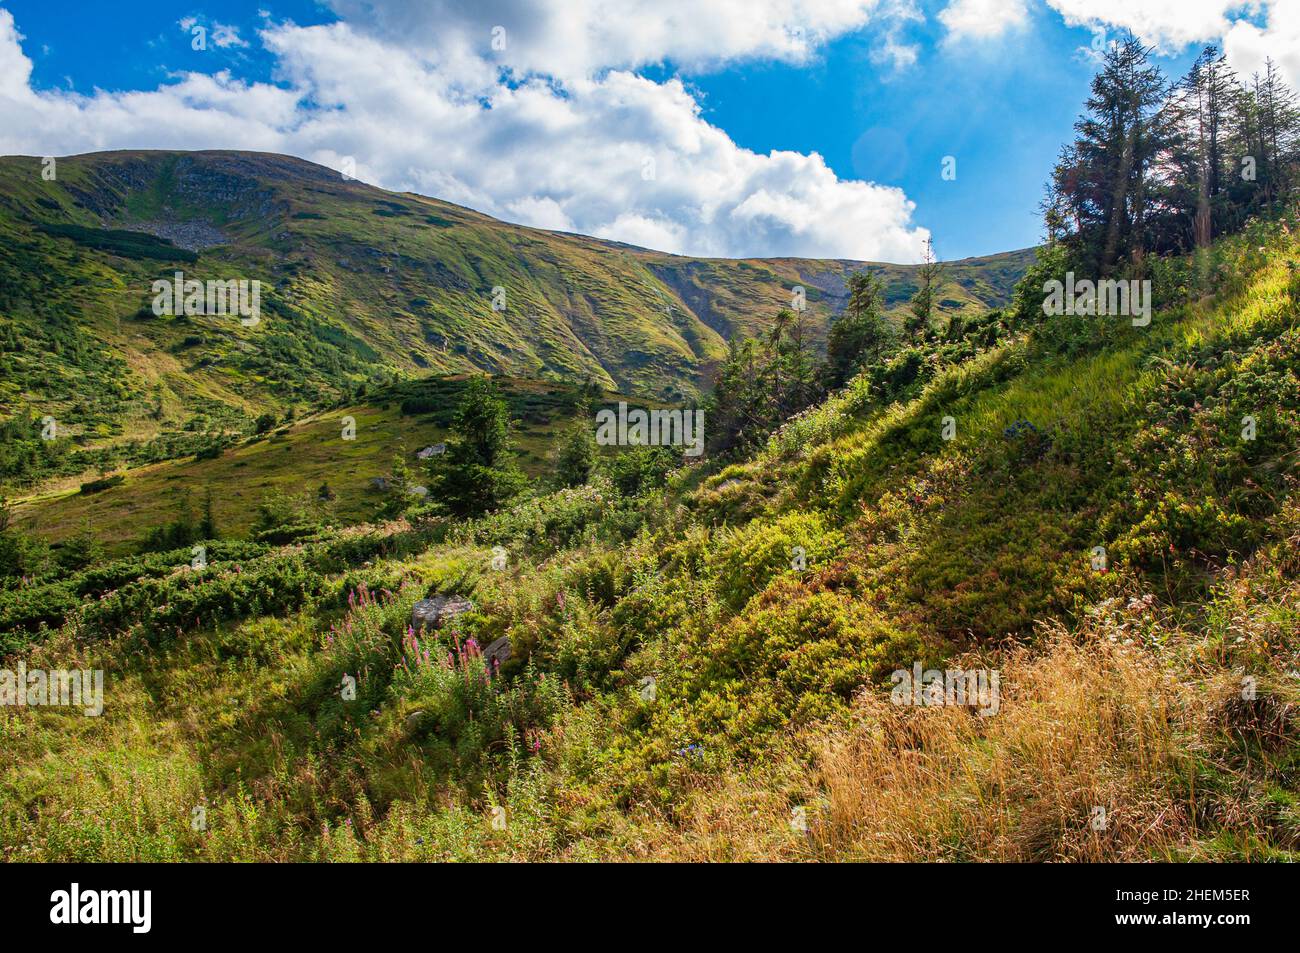 The source of the Prut River, on the slope of Hoverla. Untouched nature of the Carpathian Mountains. Summer landscape. Stock Photo